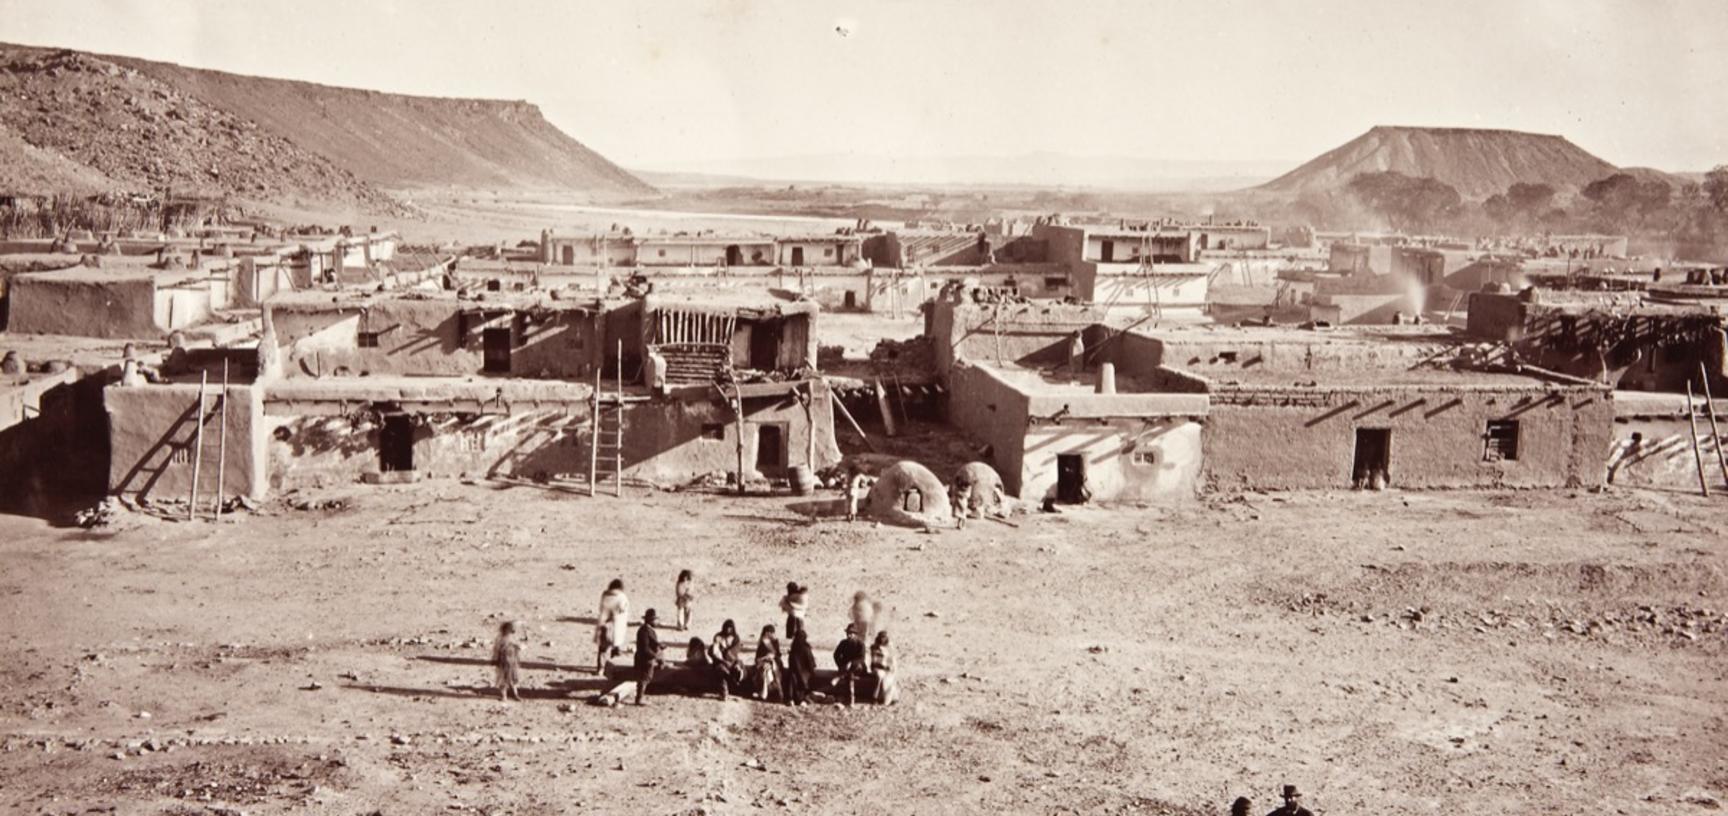 View of houses around the main plaza of San Felipe Pueblo, with the Rio Grande river visible in the distance. 